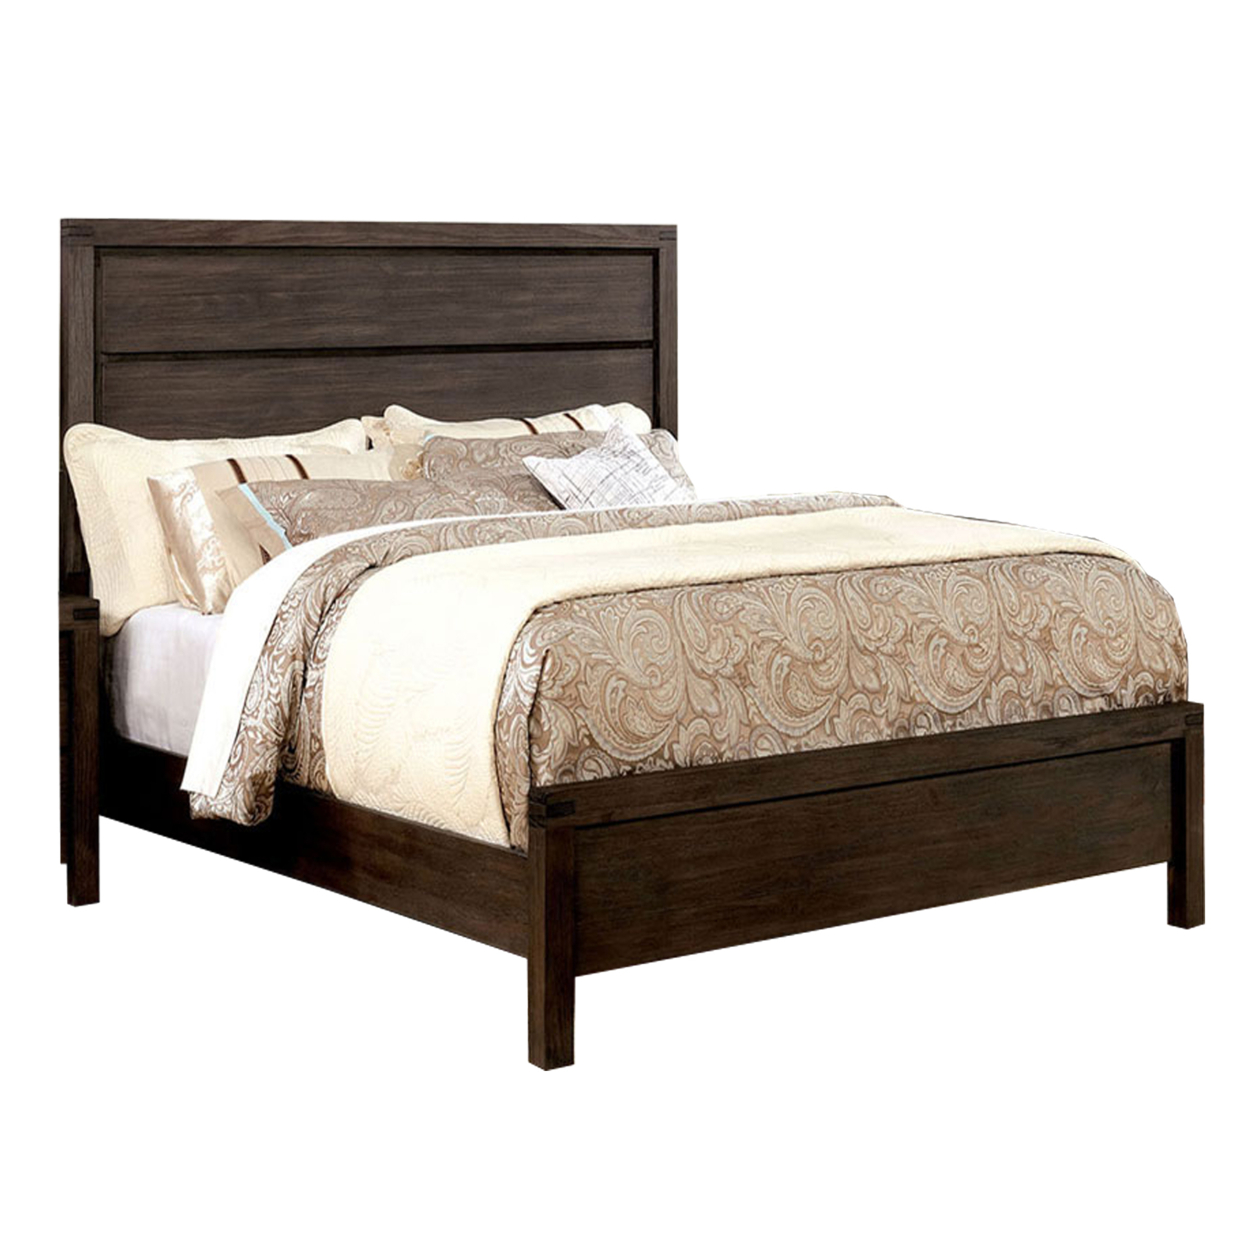 Wooden Full Size Bed With Plank Style Headboard And Block Legs, Brown- Saltoro Sherpi